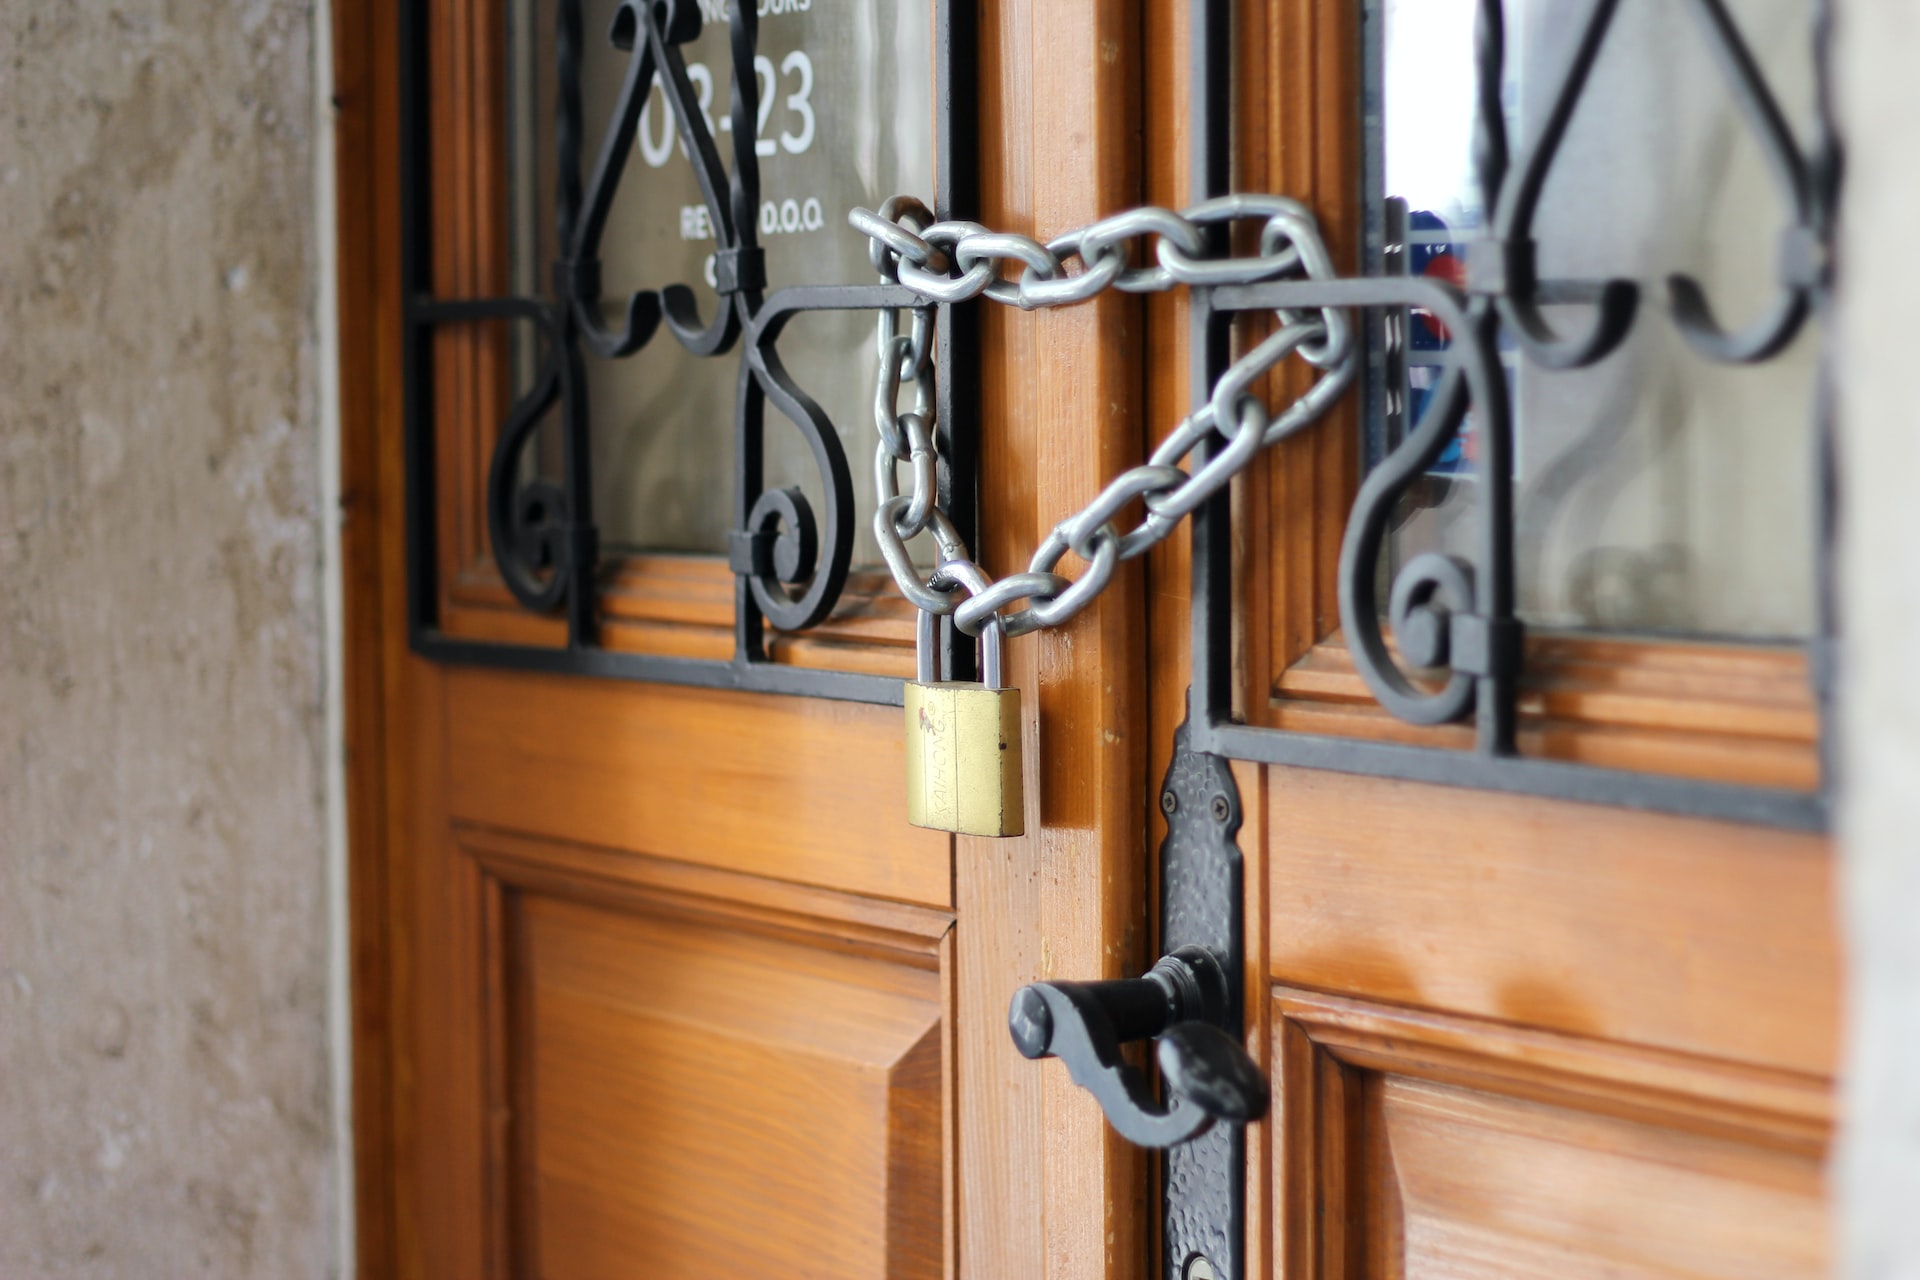 Maximize Security with Quality Access Control Technology